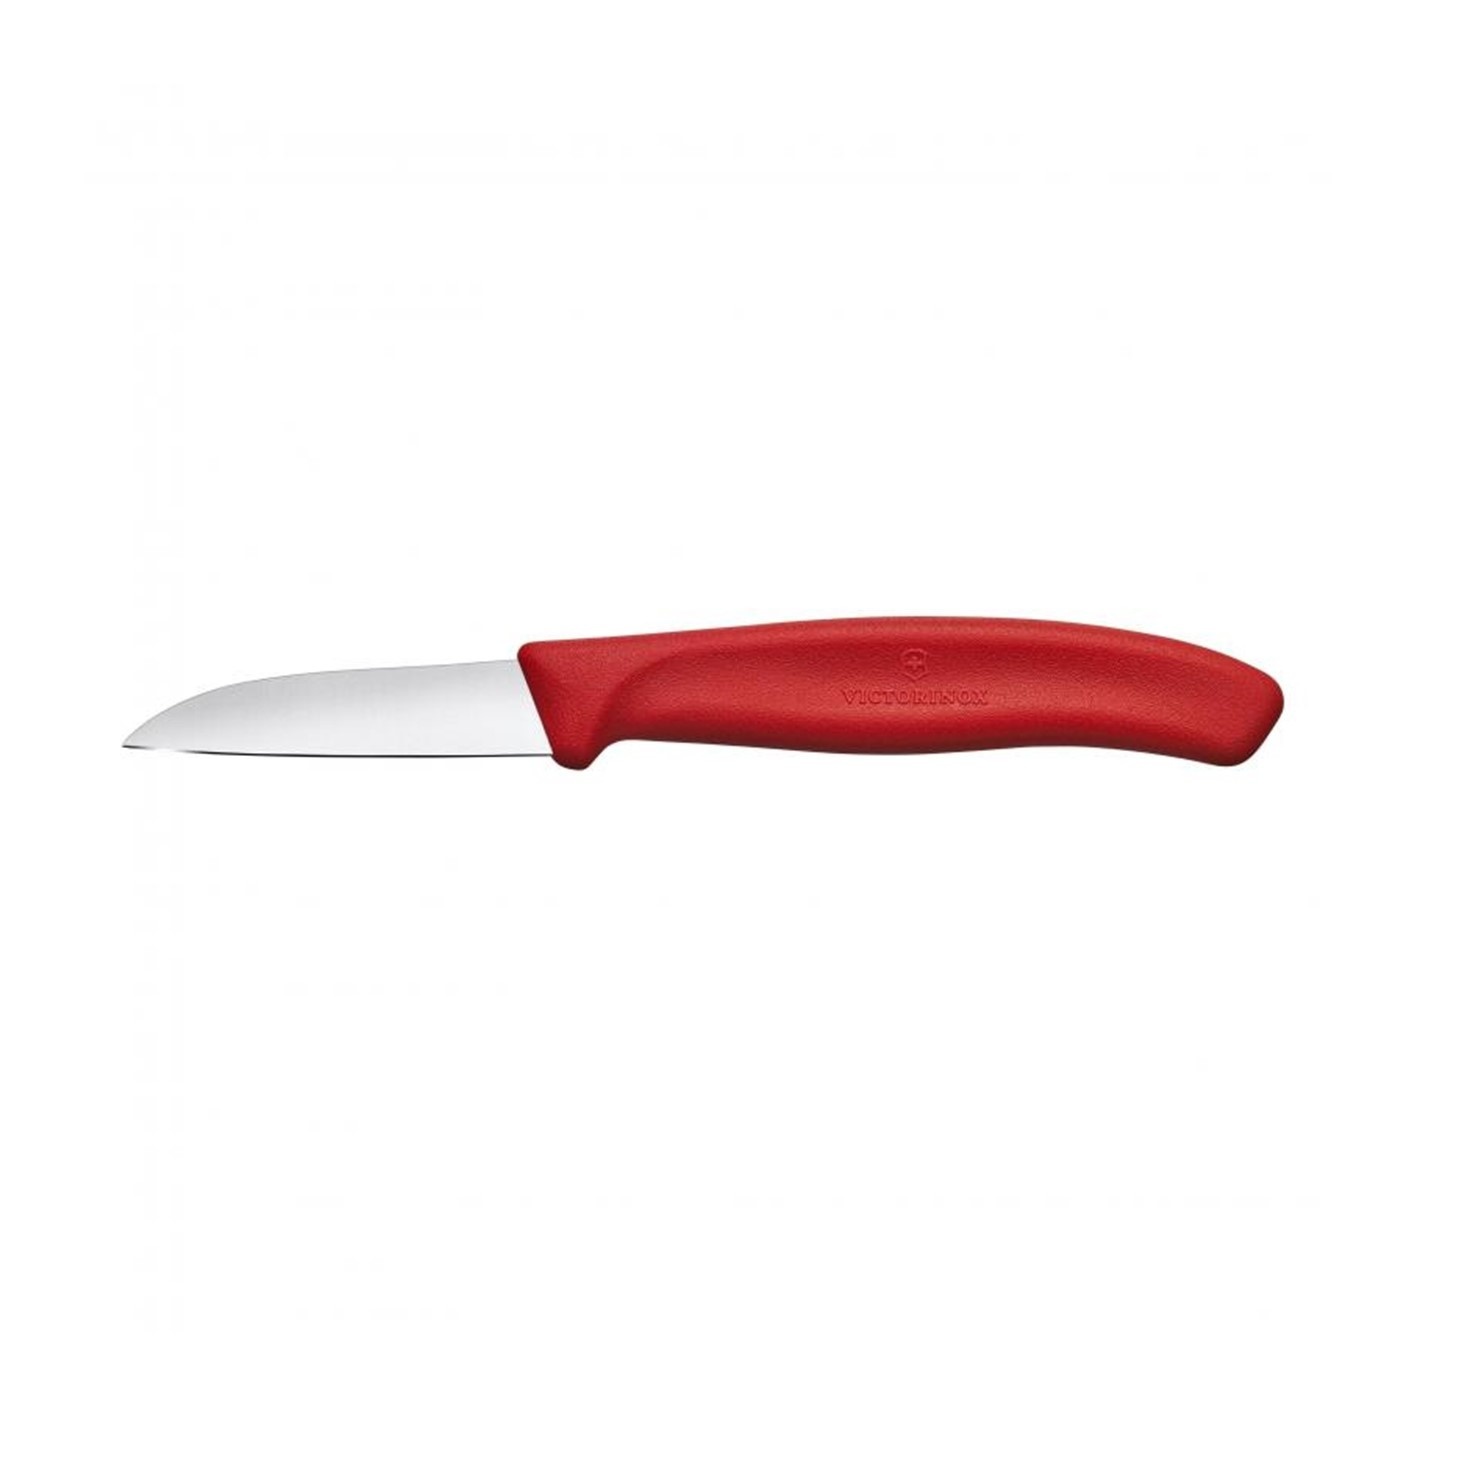 Victorinox Swiss Army Classic Paring Knife , Spear Point Blade , 2 1/2" , Red